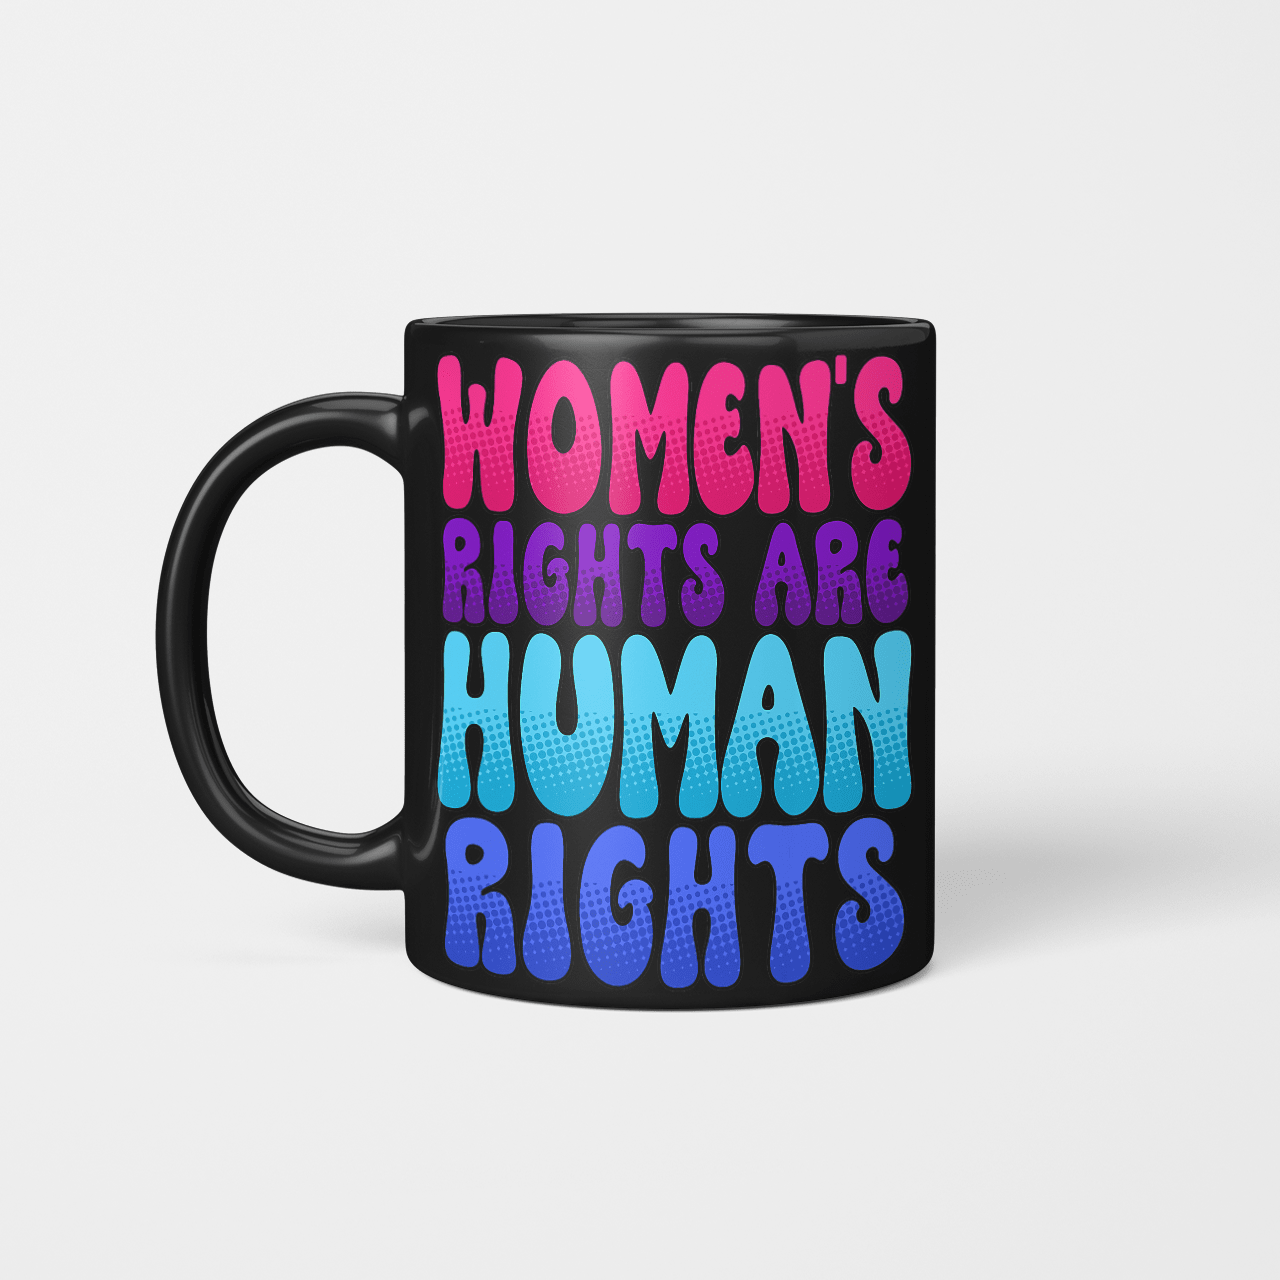 Women's Rights Are Human Rights Wmr2322